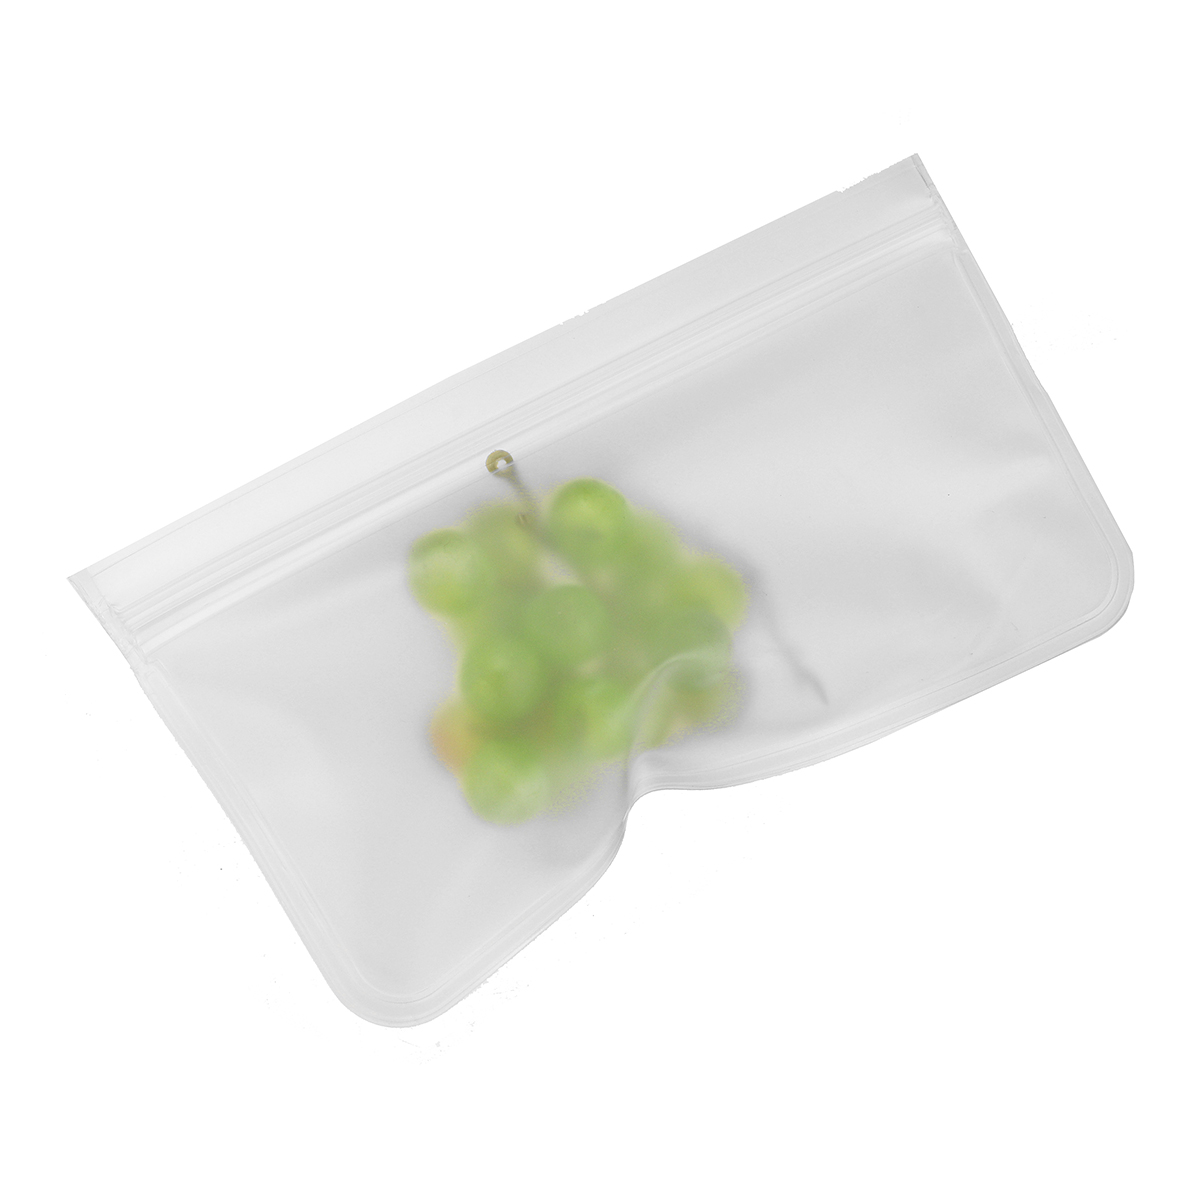 Food-Storage-Bags-Reusable-Silicone-Containers-for-Lunch-Vegetable-Resealable-Kitchen-Storage-Bag-1680145-10